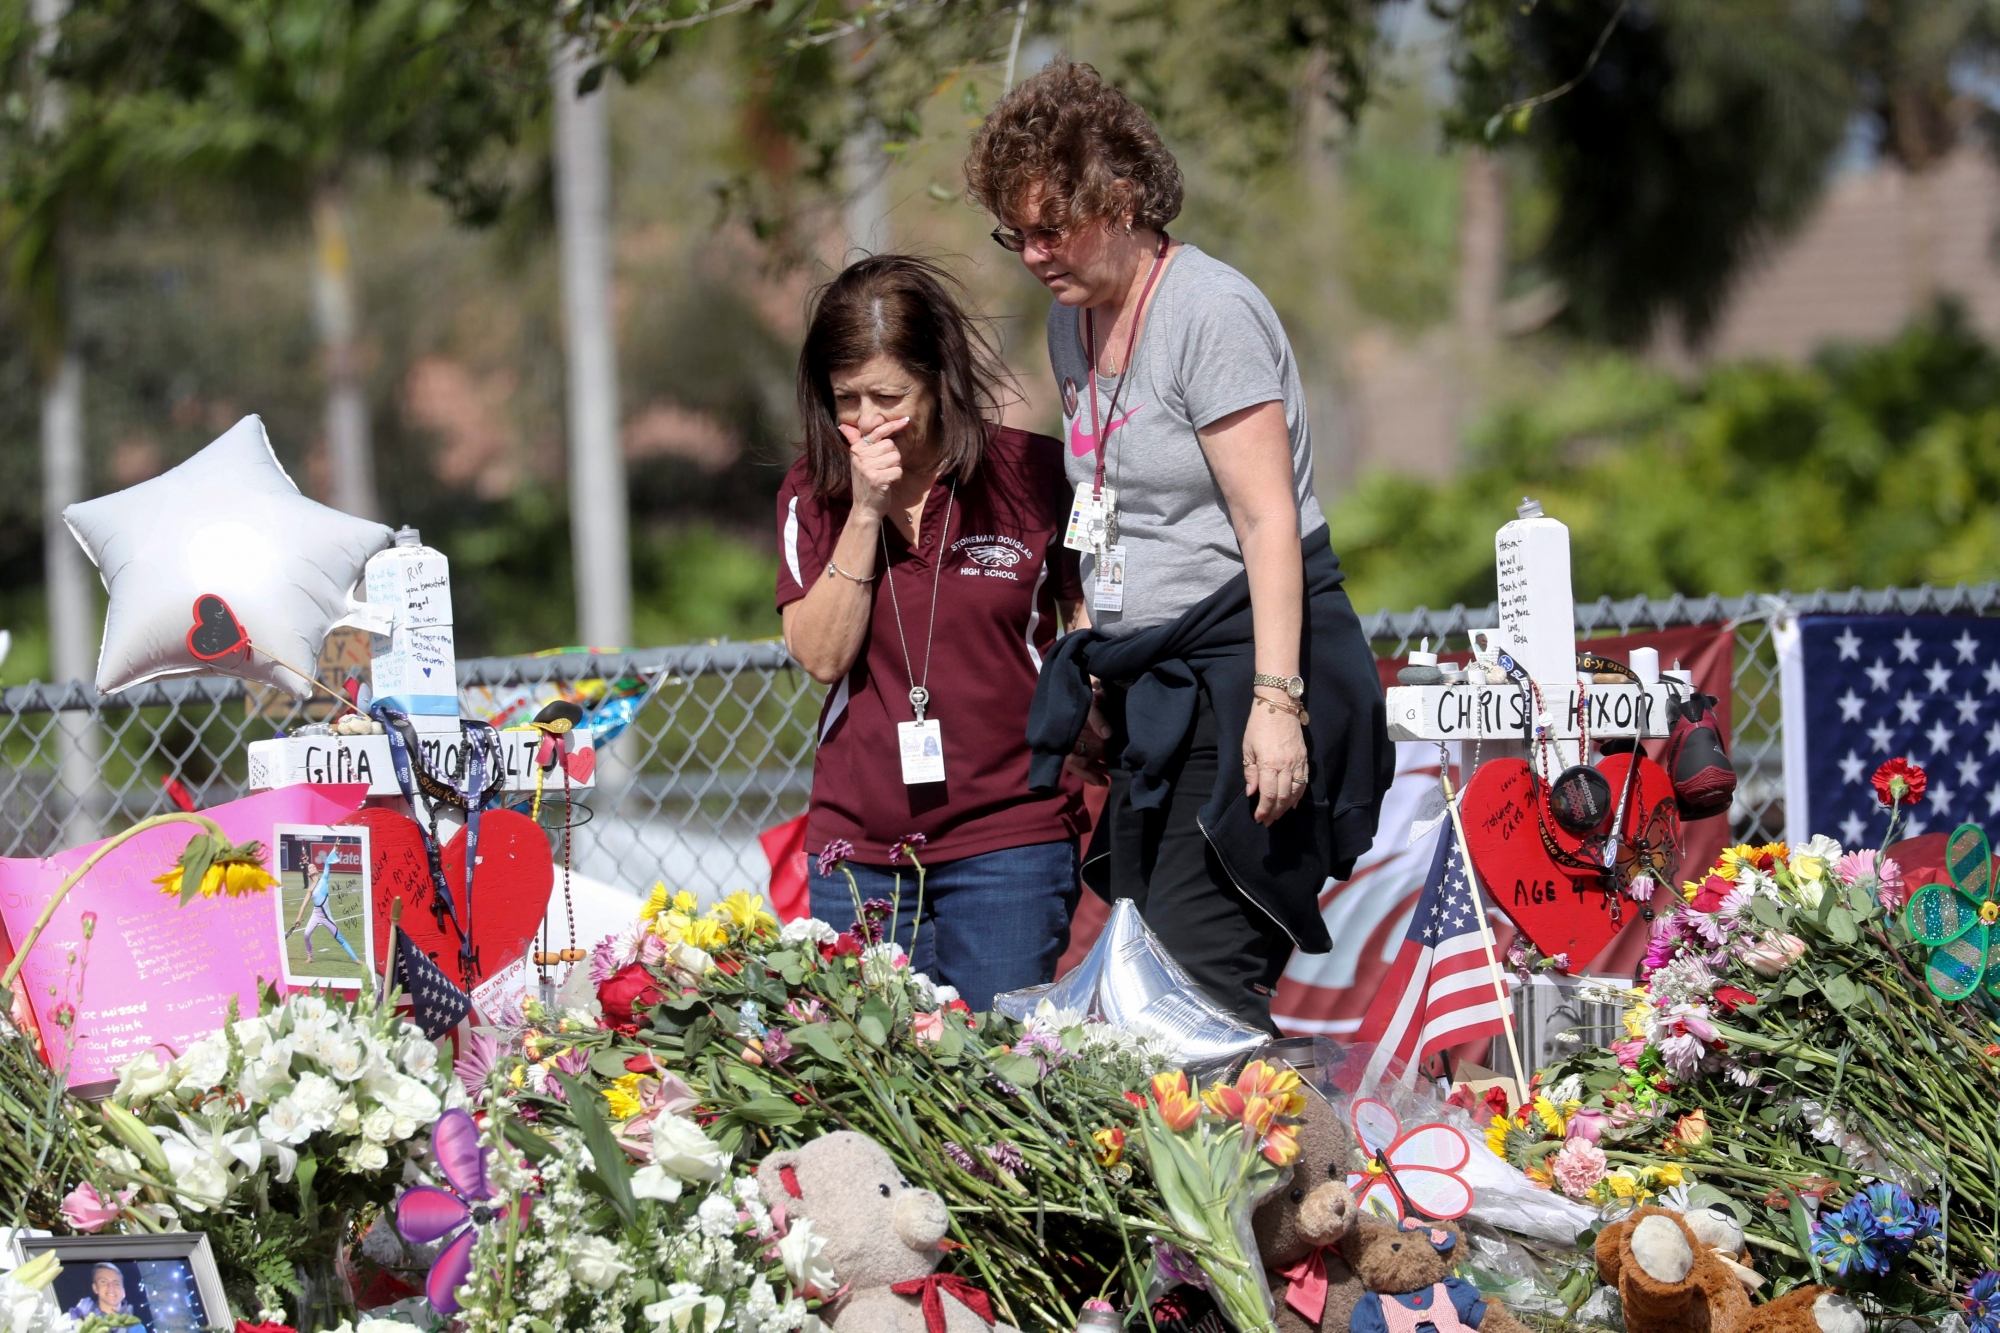 Margarita Lasalle, a bookkeeper and Joellen Berman, a guidance data specialist, look at a memorial Friday, Feb. 23, 2018 as teachers and school administrators returned to Marjory Stoneman Douglas High School for the first time since 17 victims were killed in a mass shooting at the school, in Parkland, Fla. (Mike Stocker/South Florida Sun-Sentinel via AP) School Shooting Florida